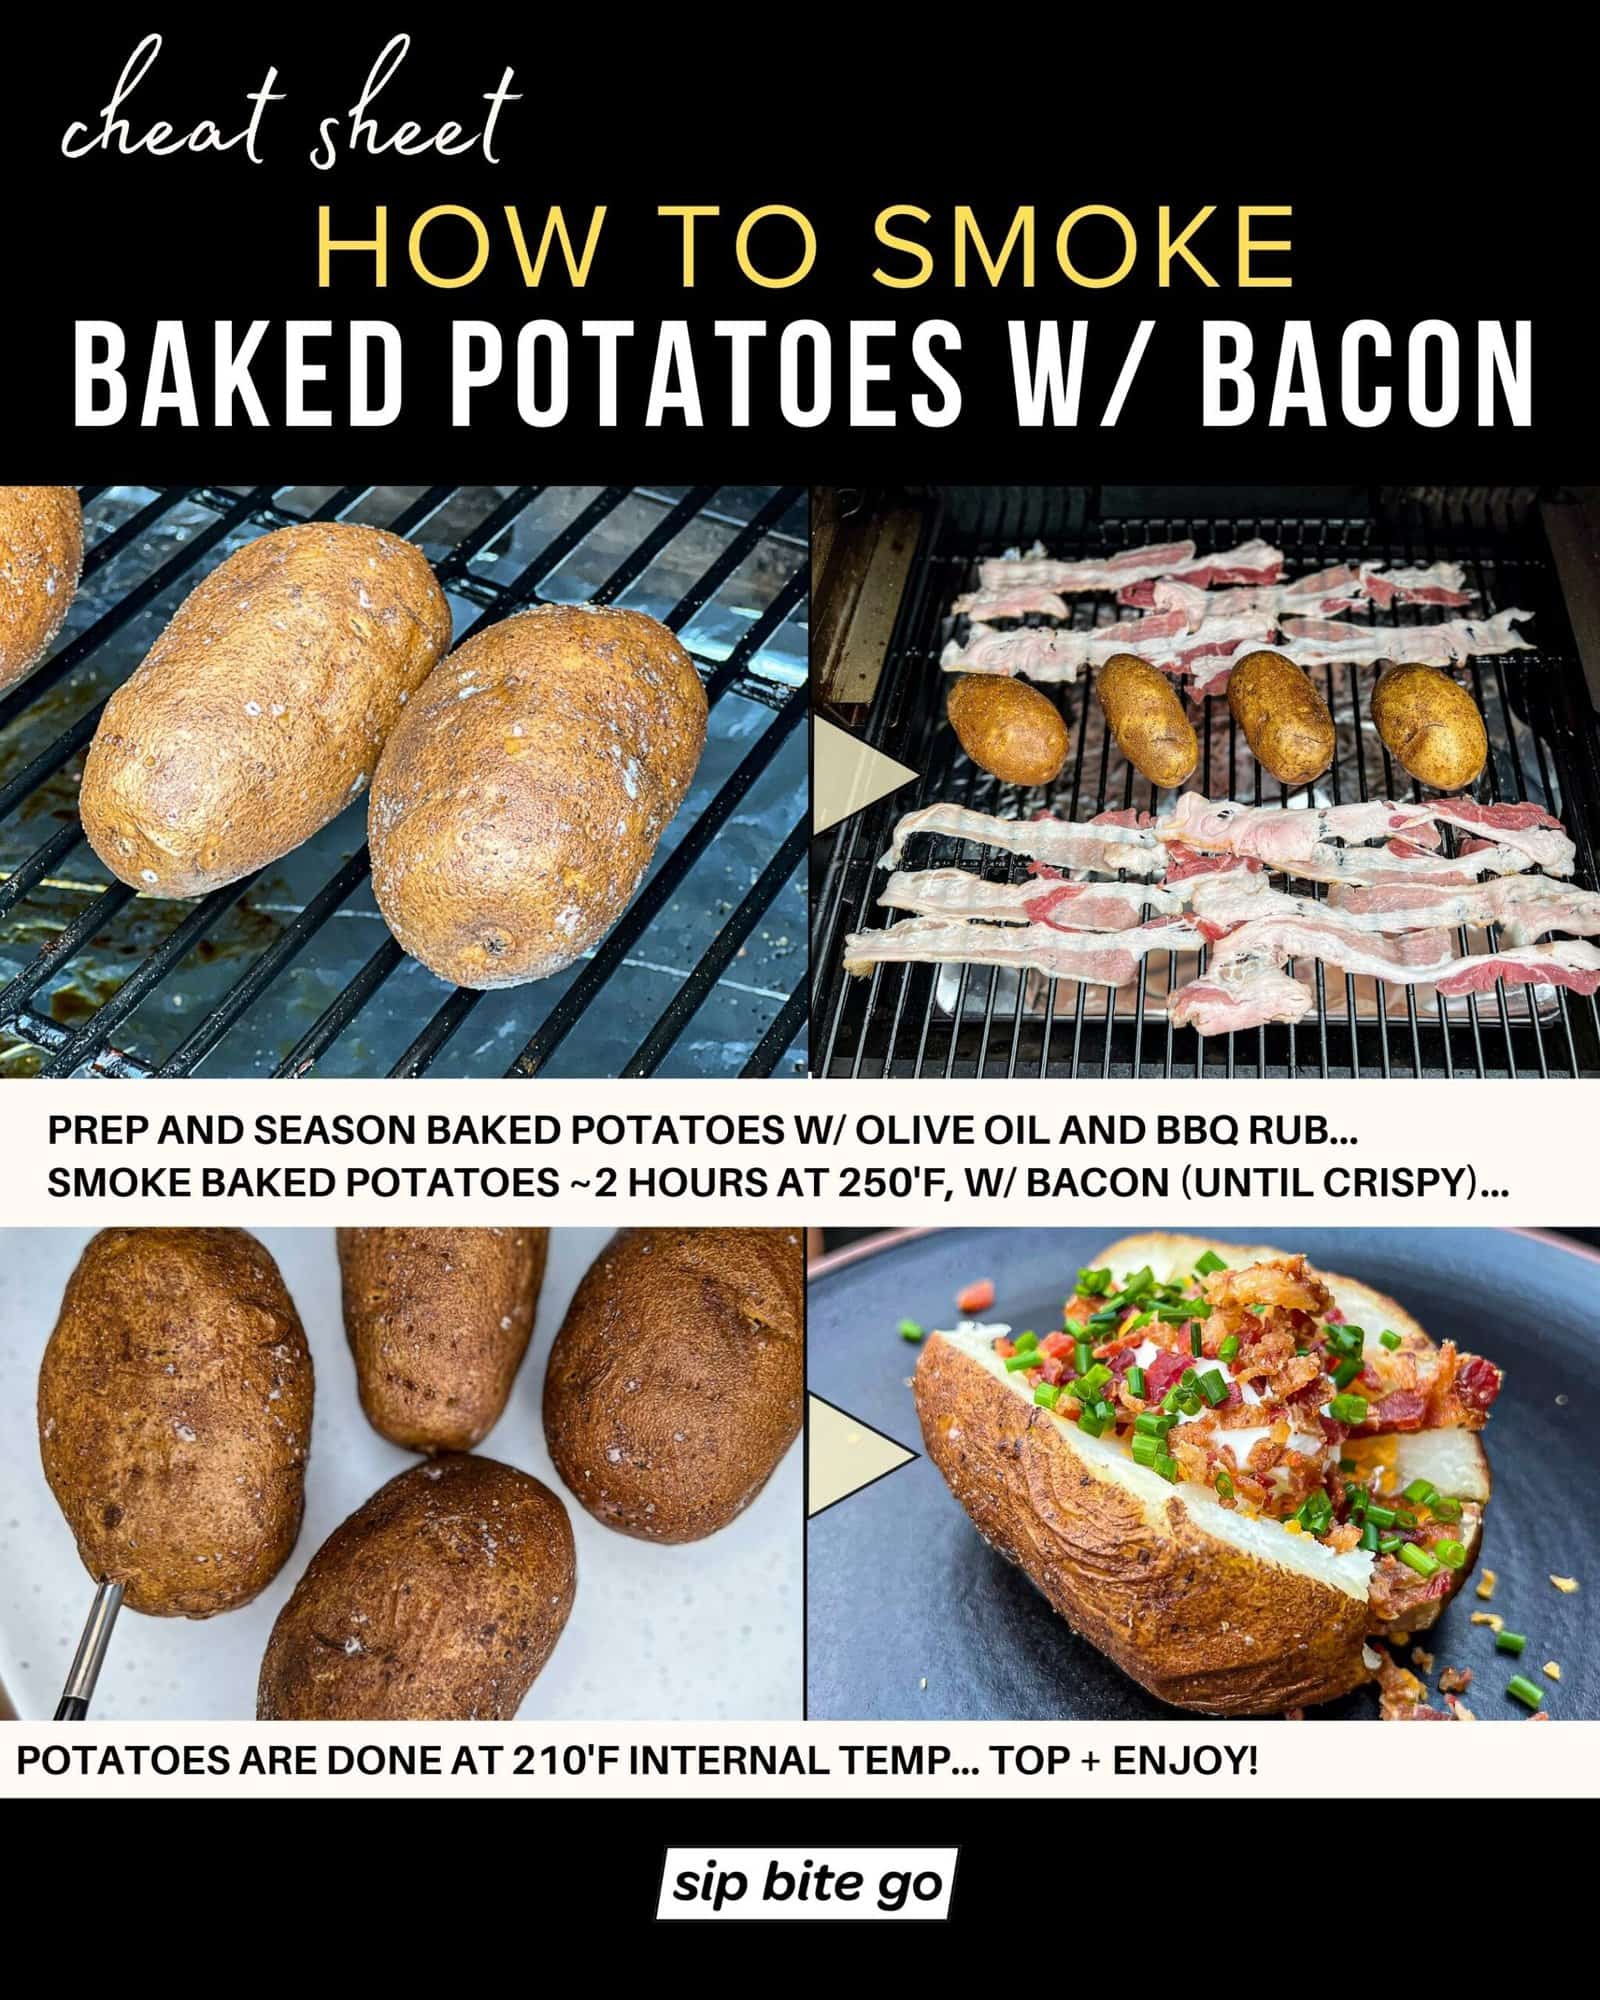 Infographic demonstrating recipe steps with captions for smoking baked potatoes with bacon on the Traeger pellet grill